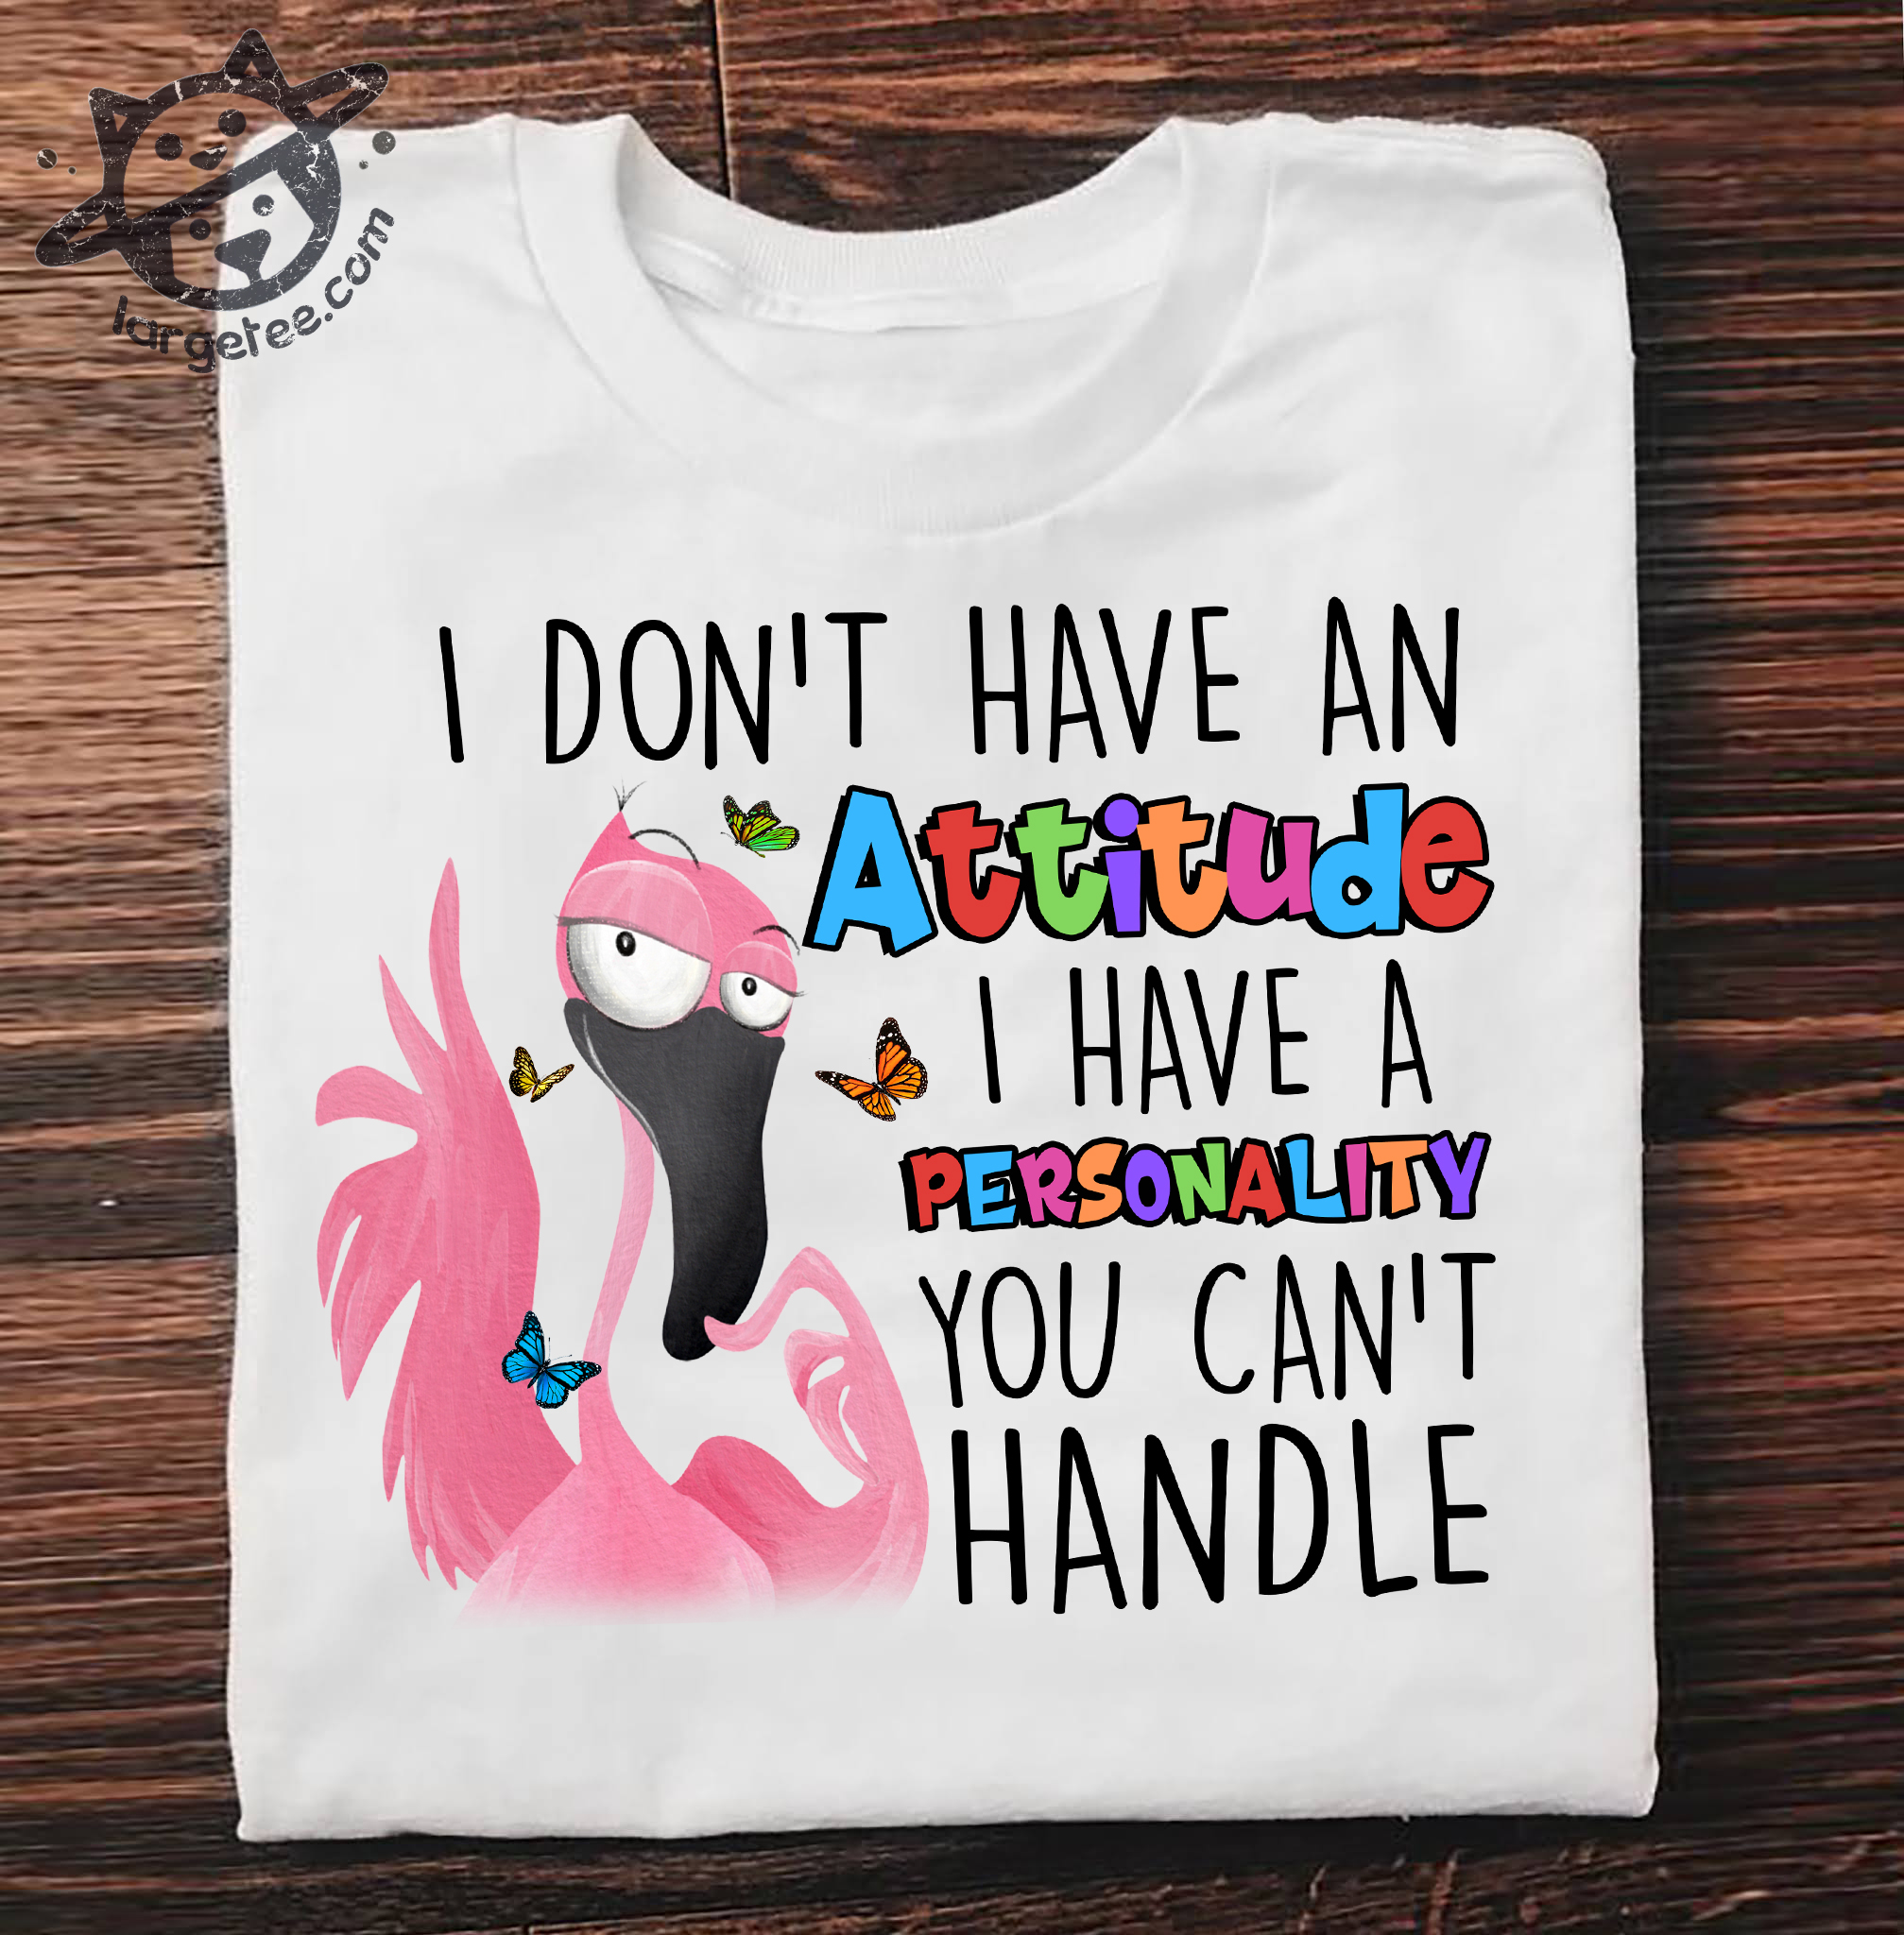 Flamingo Butterly – I don’t have an attitude i have a personality you can’t handle